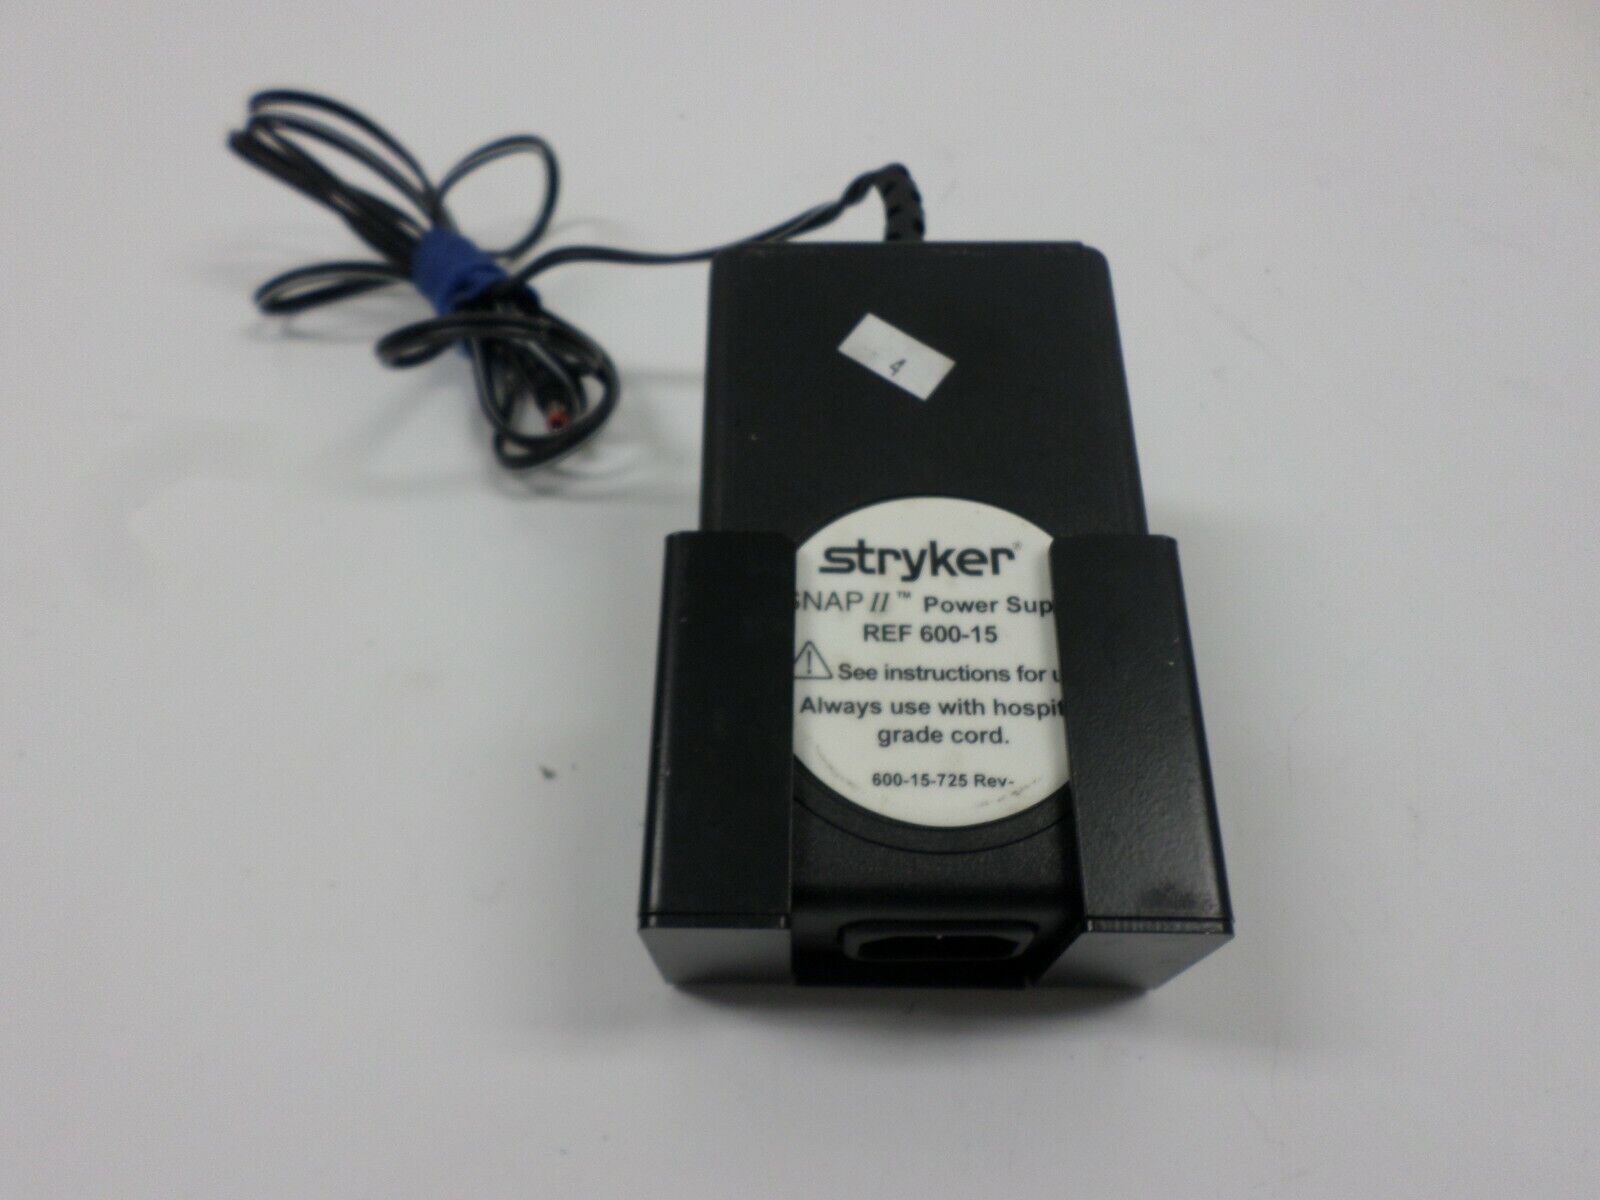 STRYKER Snap II Consciousness Monitor Power Supply SW173